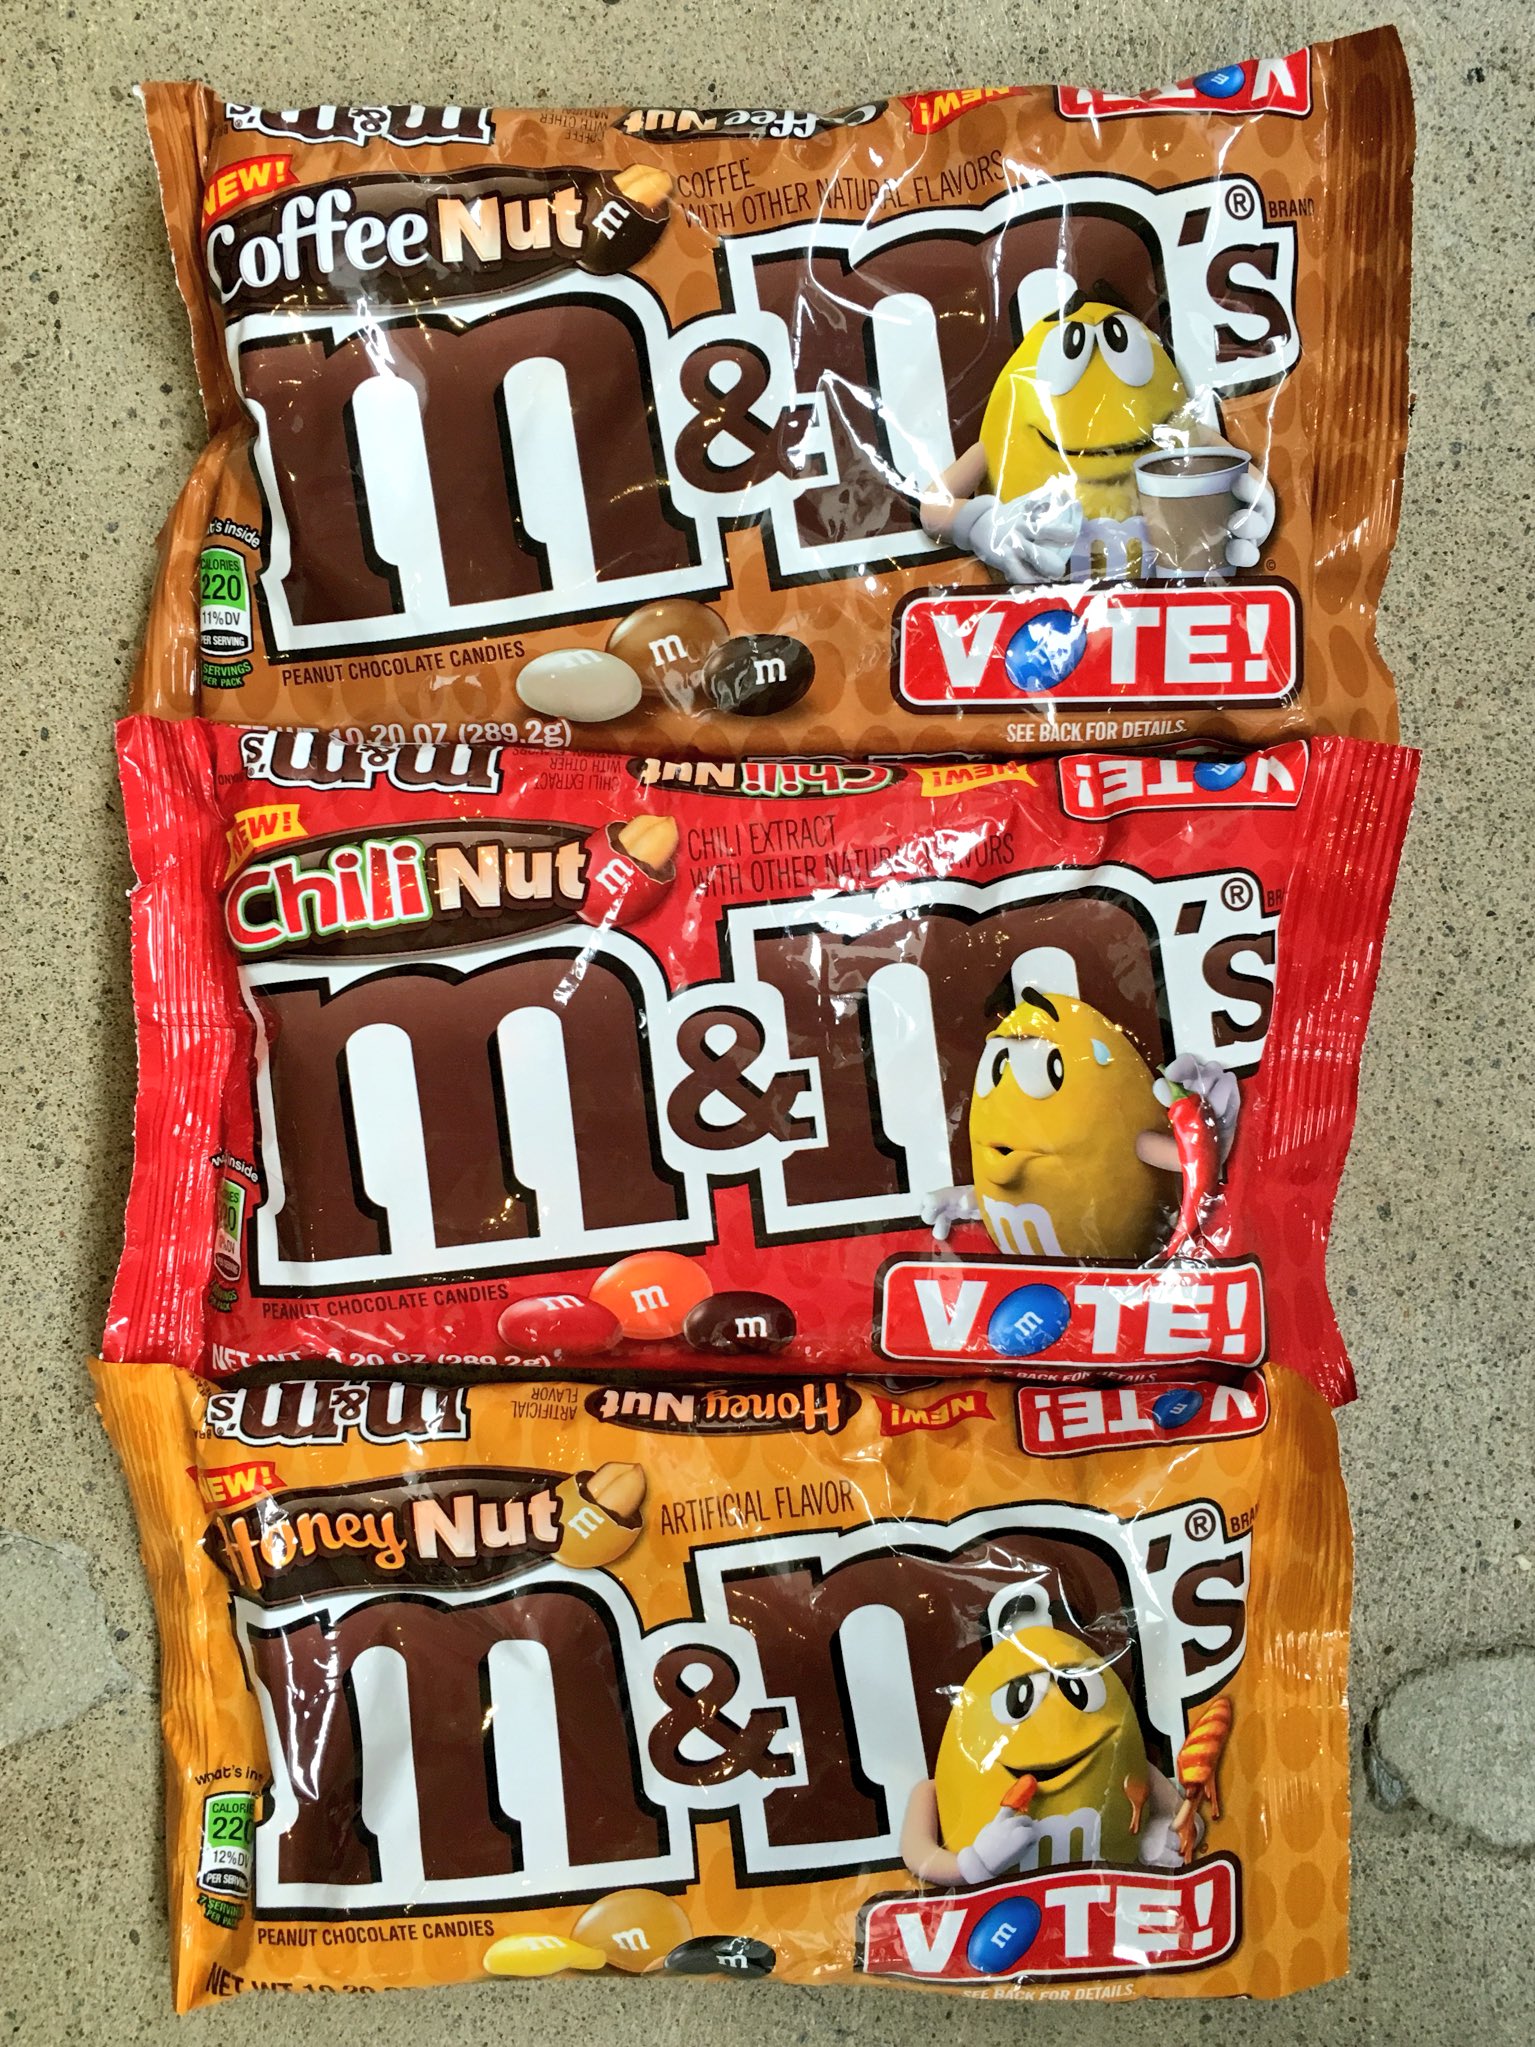 FATGUYFOODBLOG: M&M's have gone nuts! THREE NEW FLAVORS: Honey Nut, Coffee  Nut, and Chili Nut!